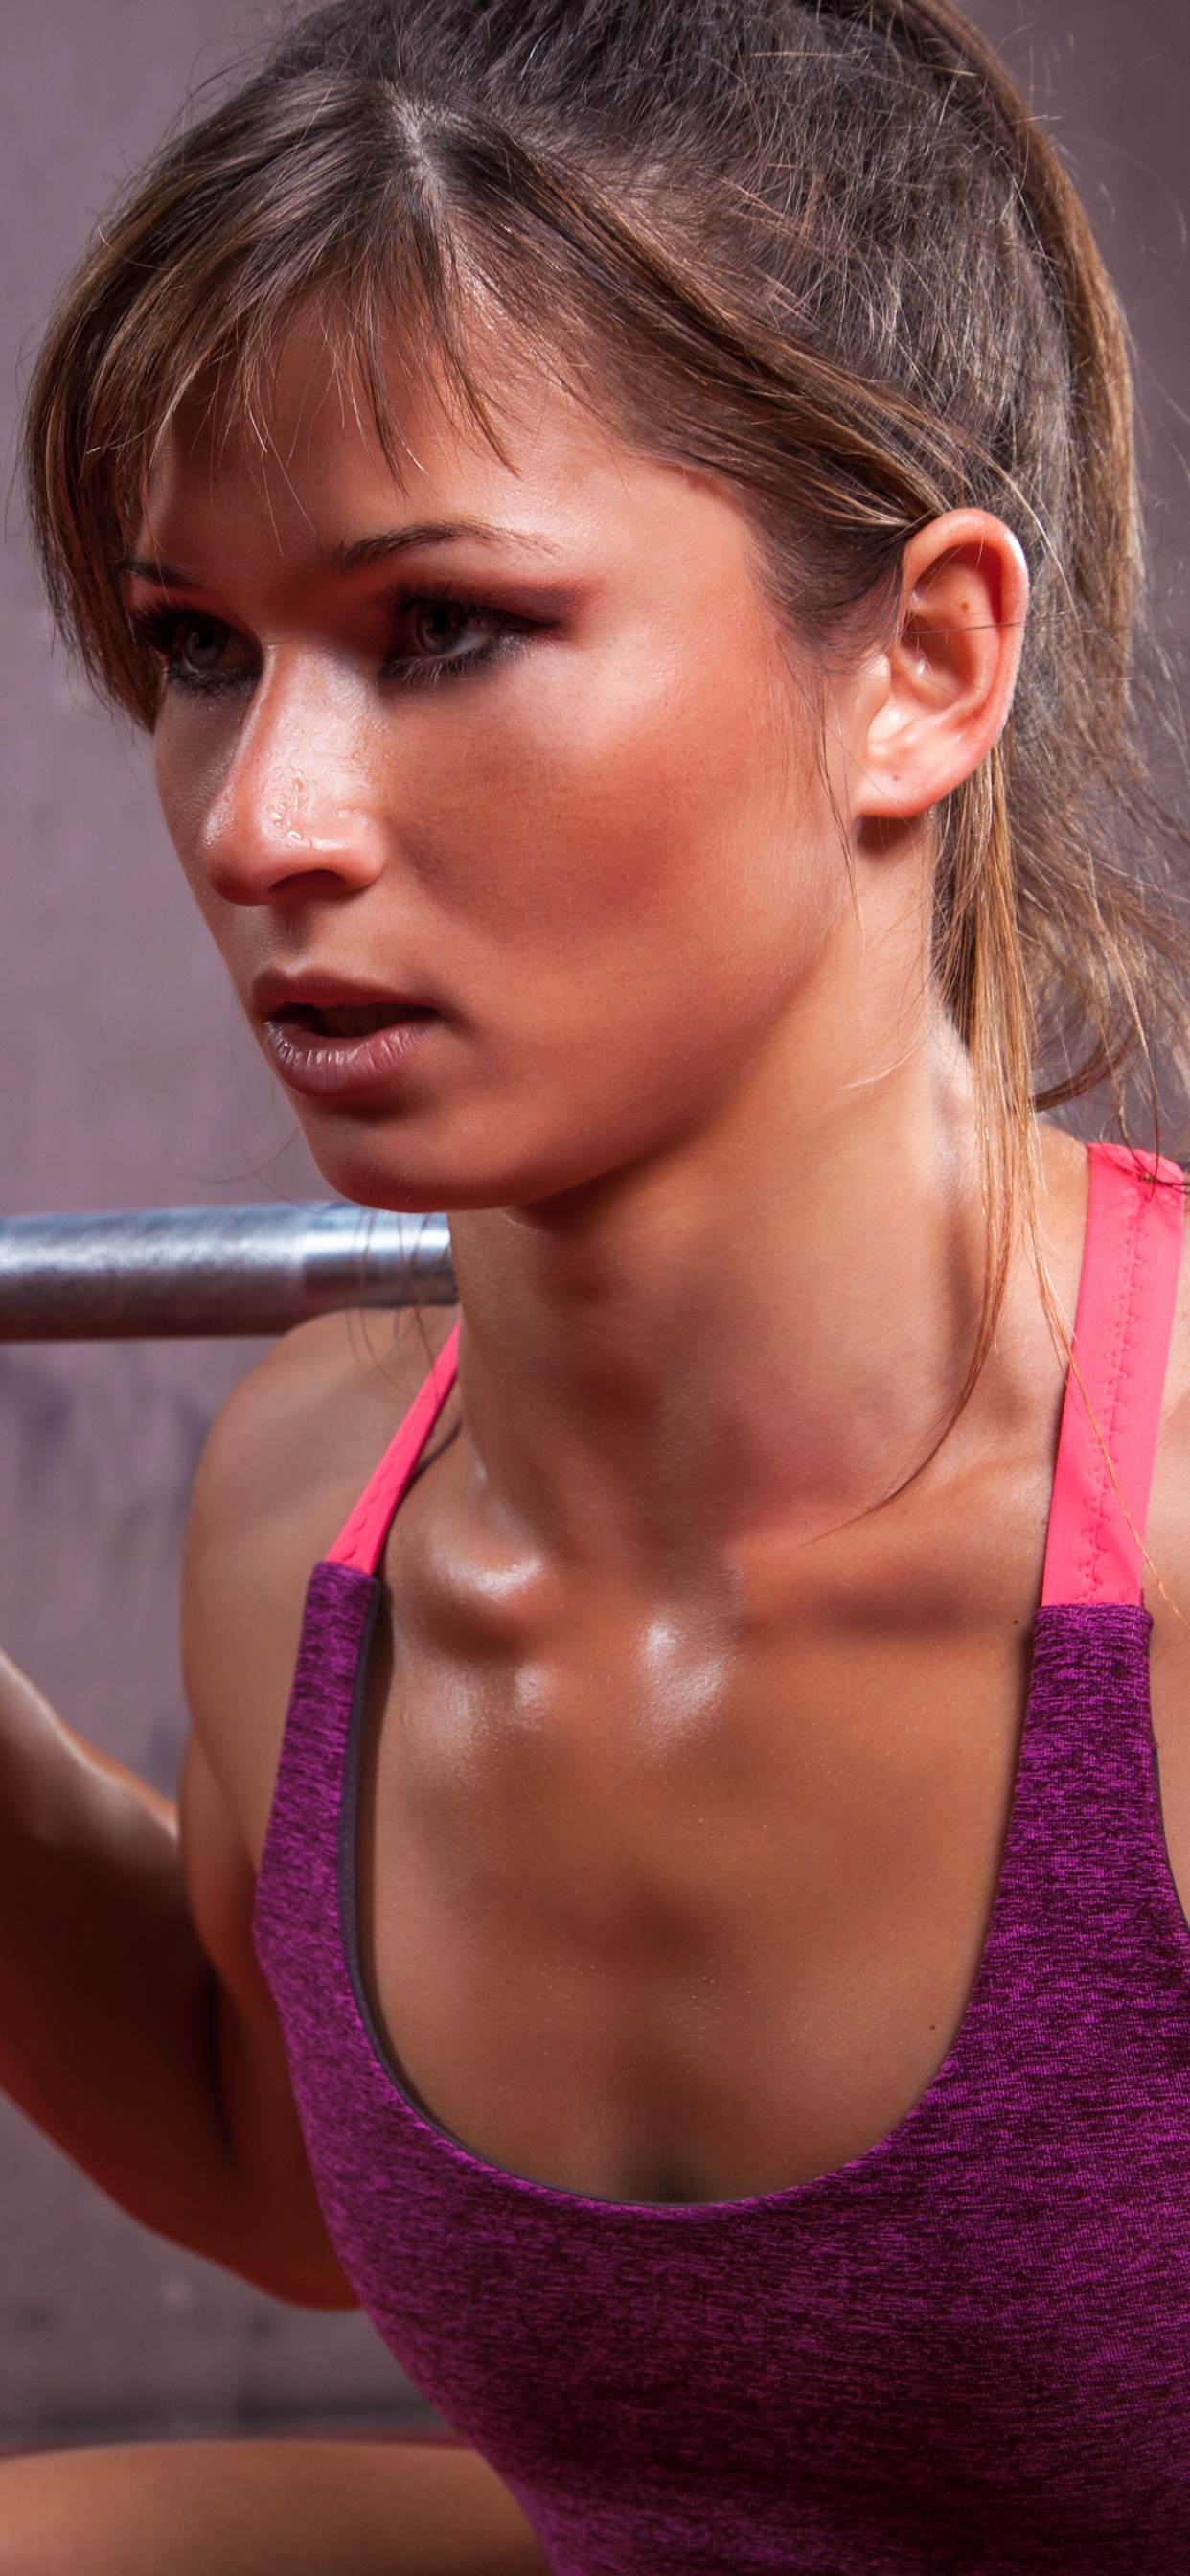 Woman in Pink Tank Top Holding Barbell. Wallpaper in 1242x2688 Resolution